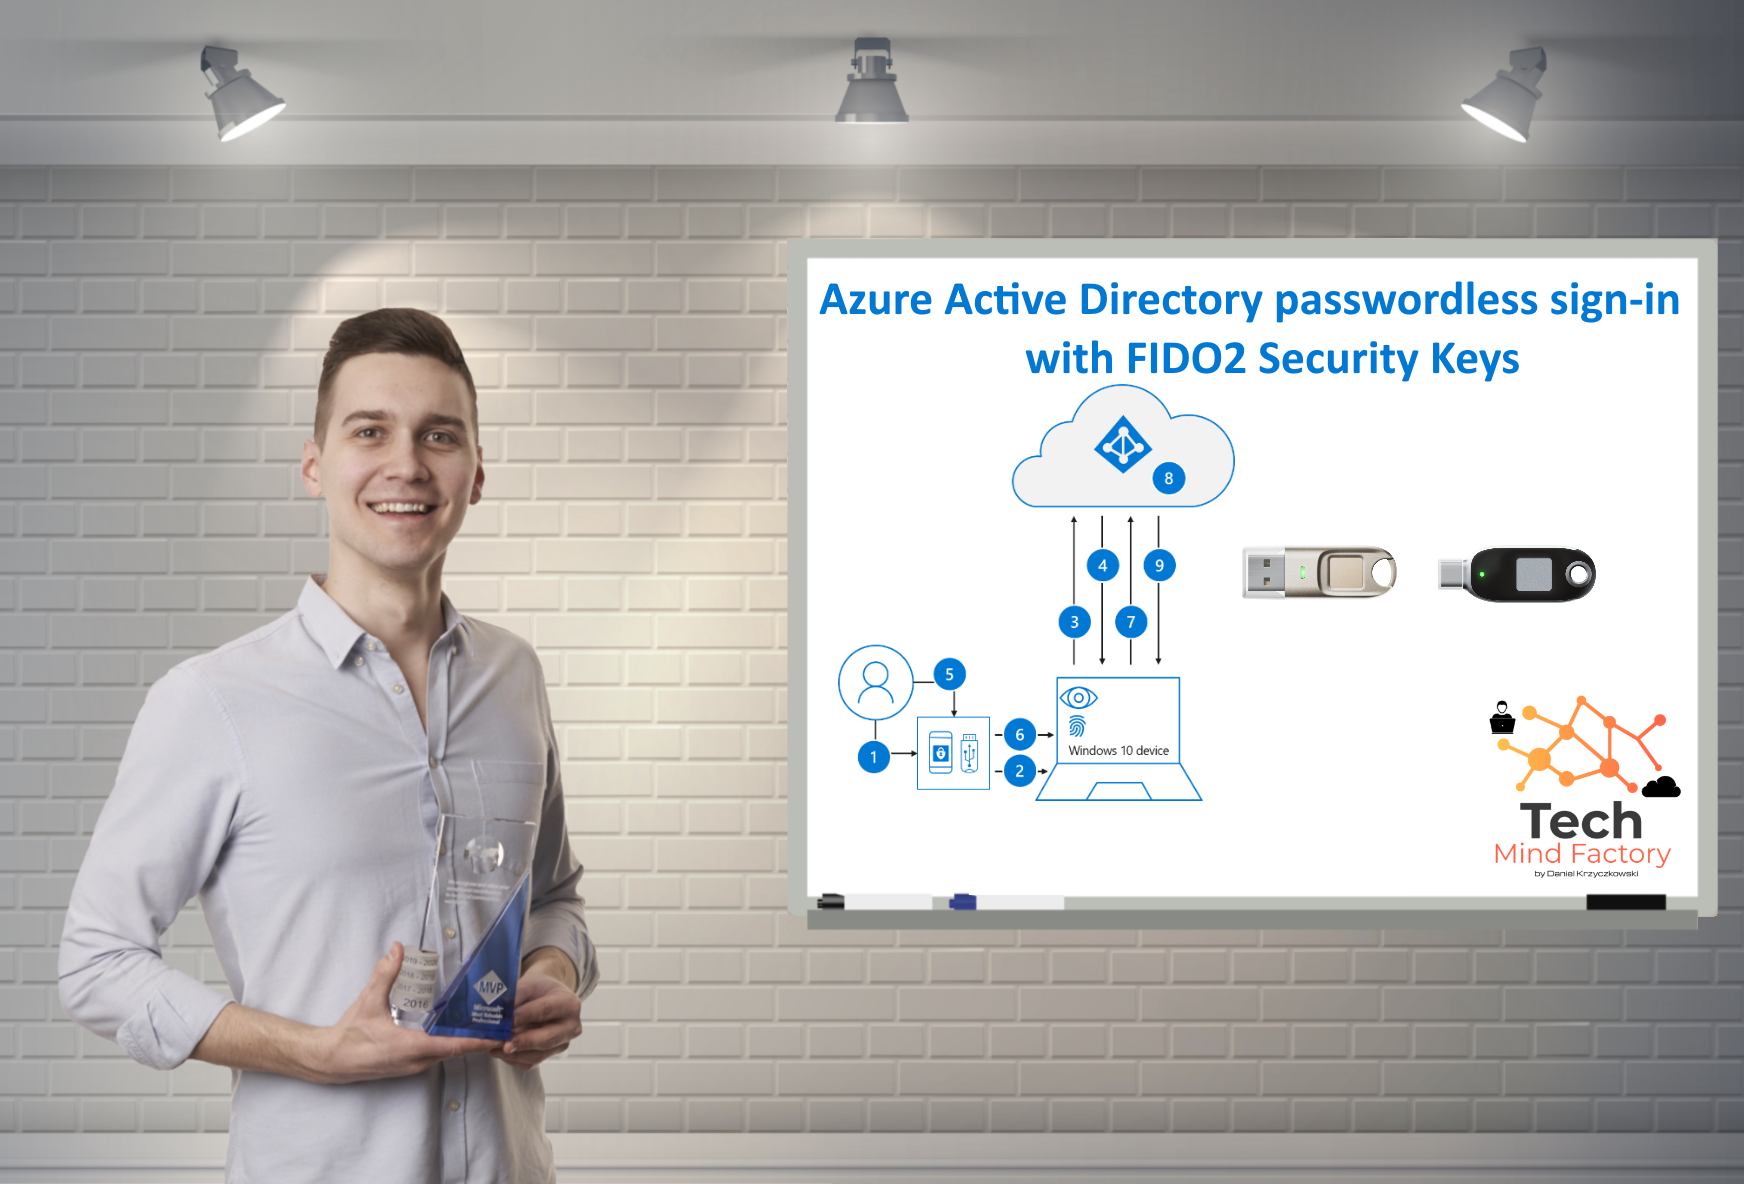 Azure Active Directory passwordless sign-in with FIDO2 Security Keys